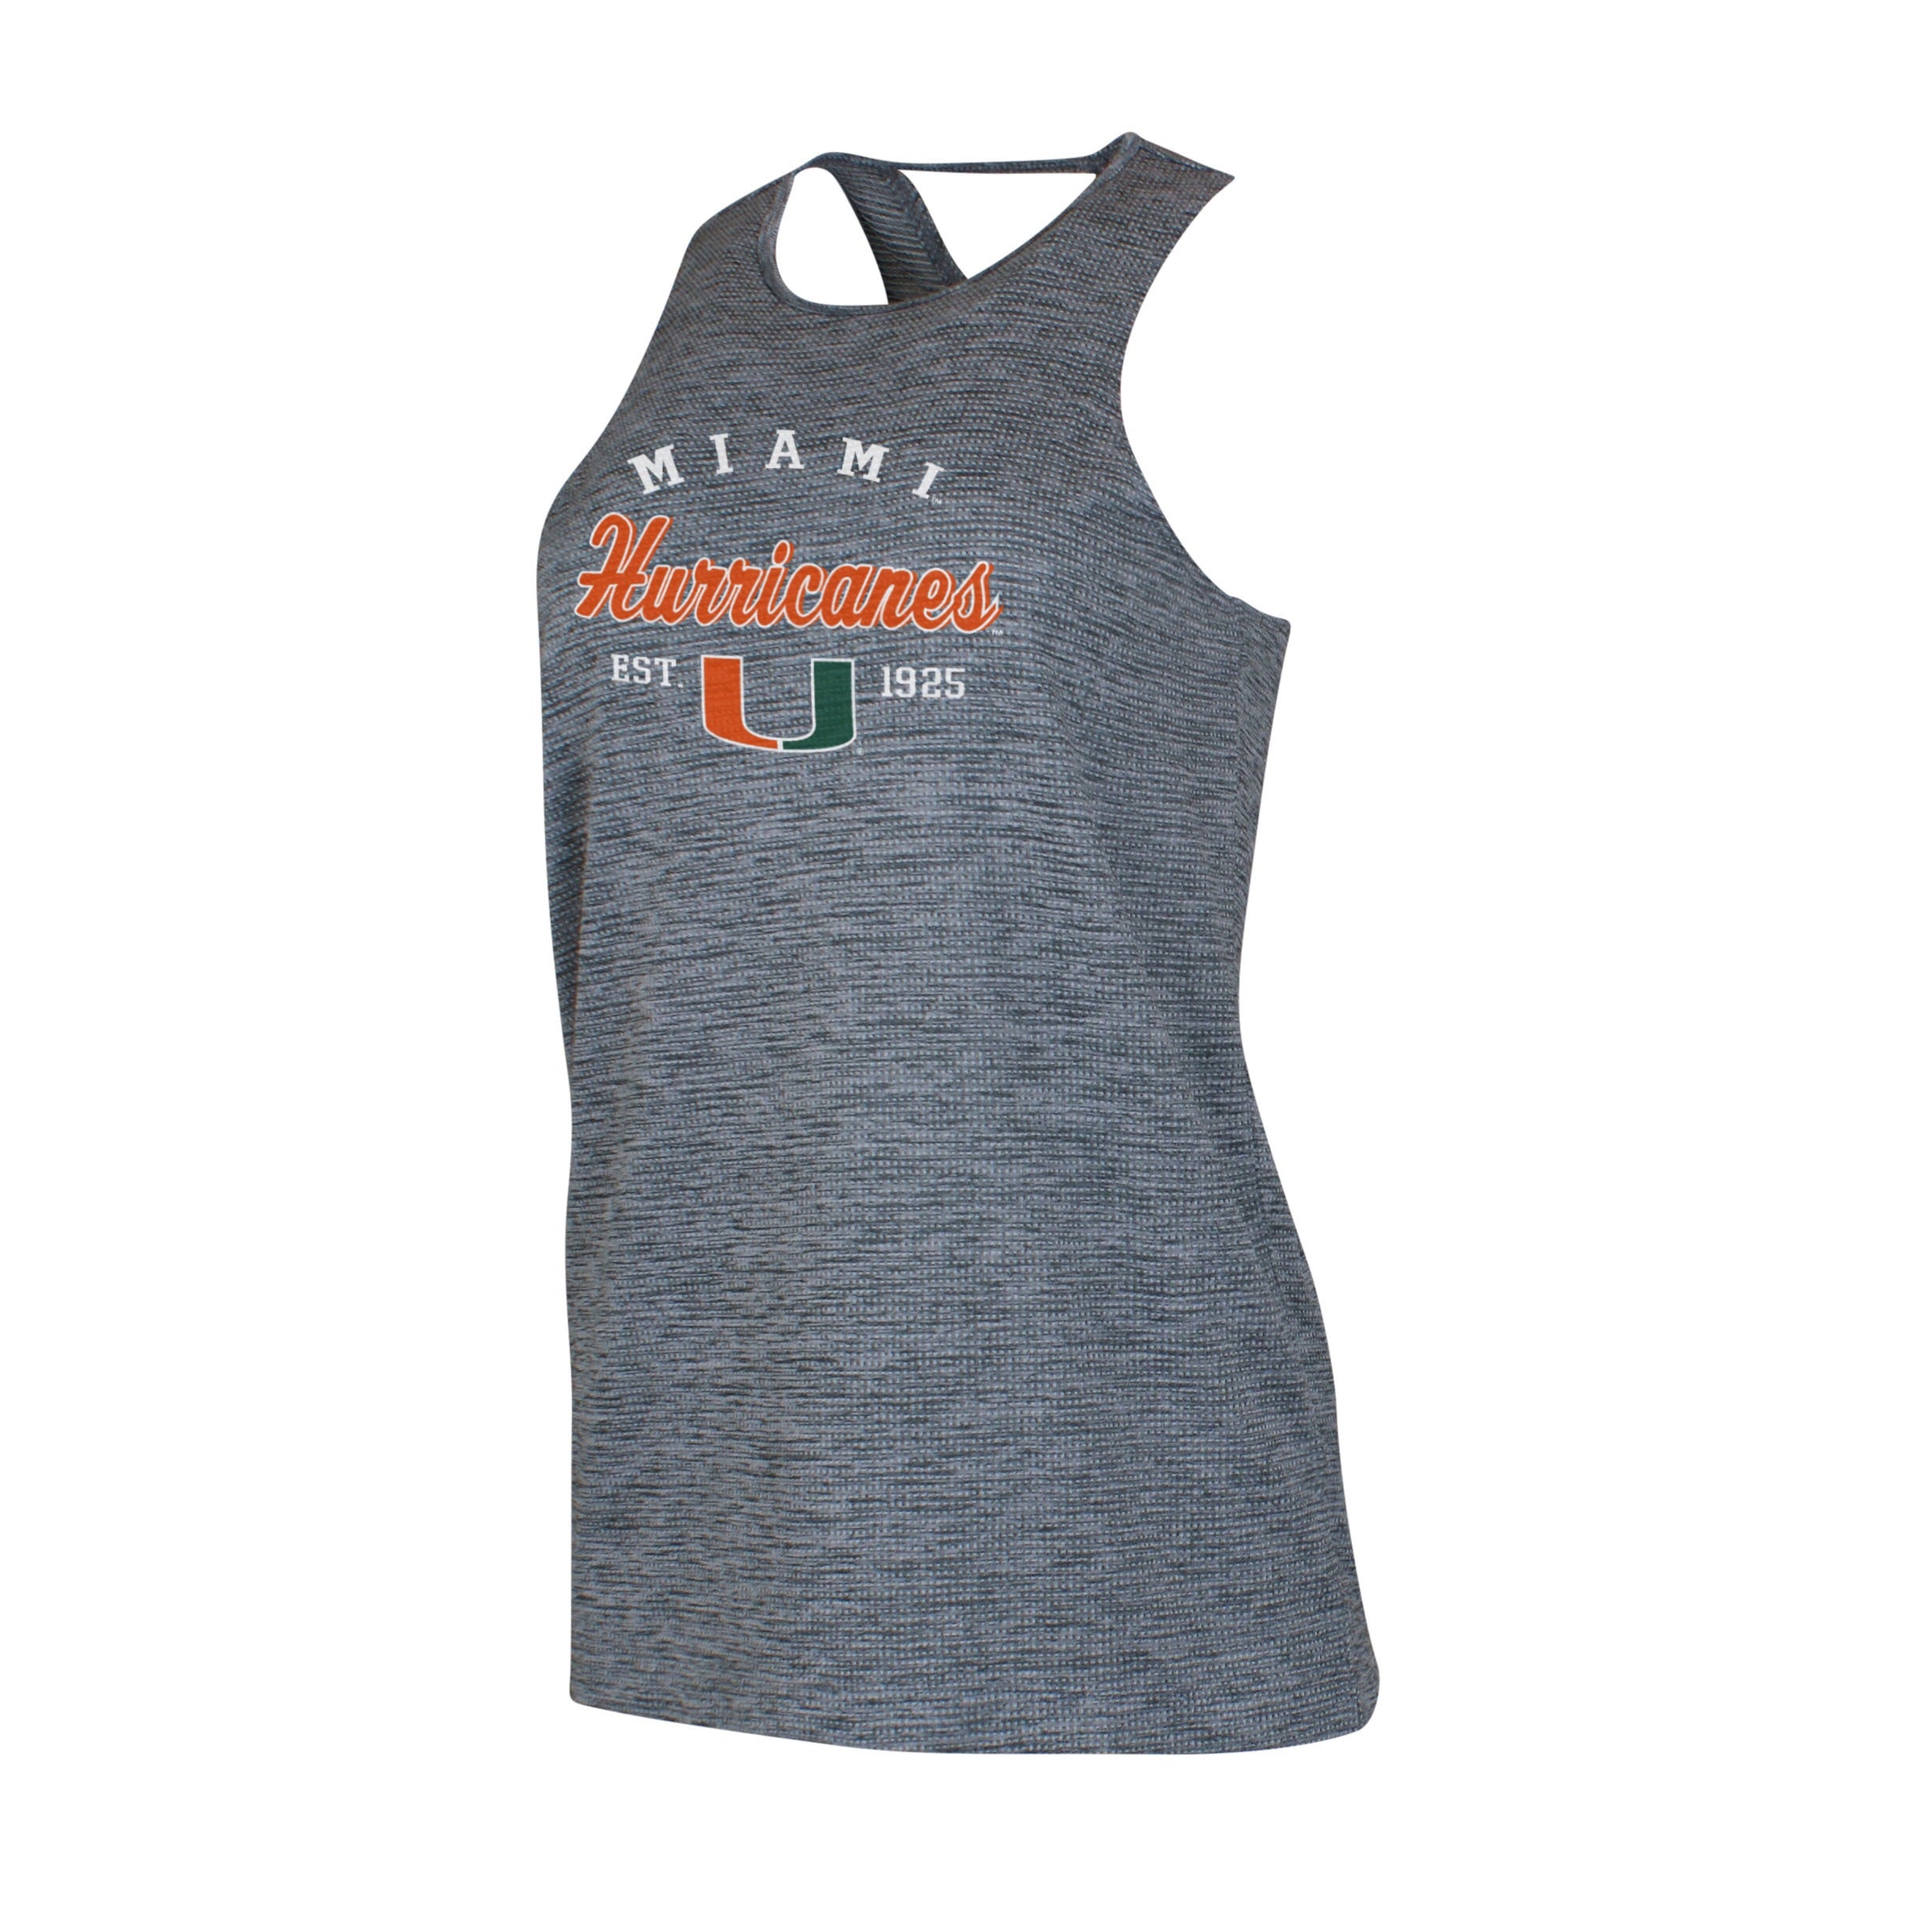 Miami Hurricanes Women's Interval Sublimated Cross Back Tank Top - Grey